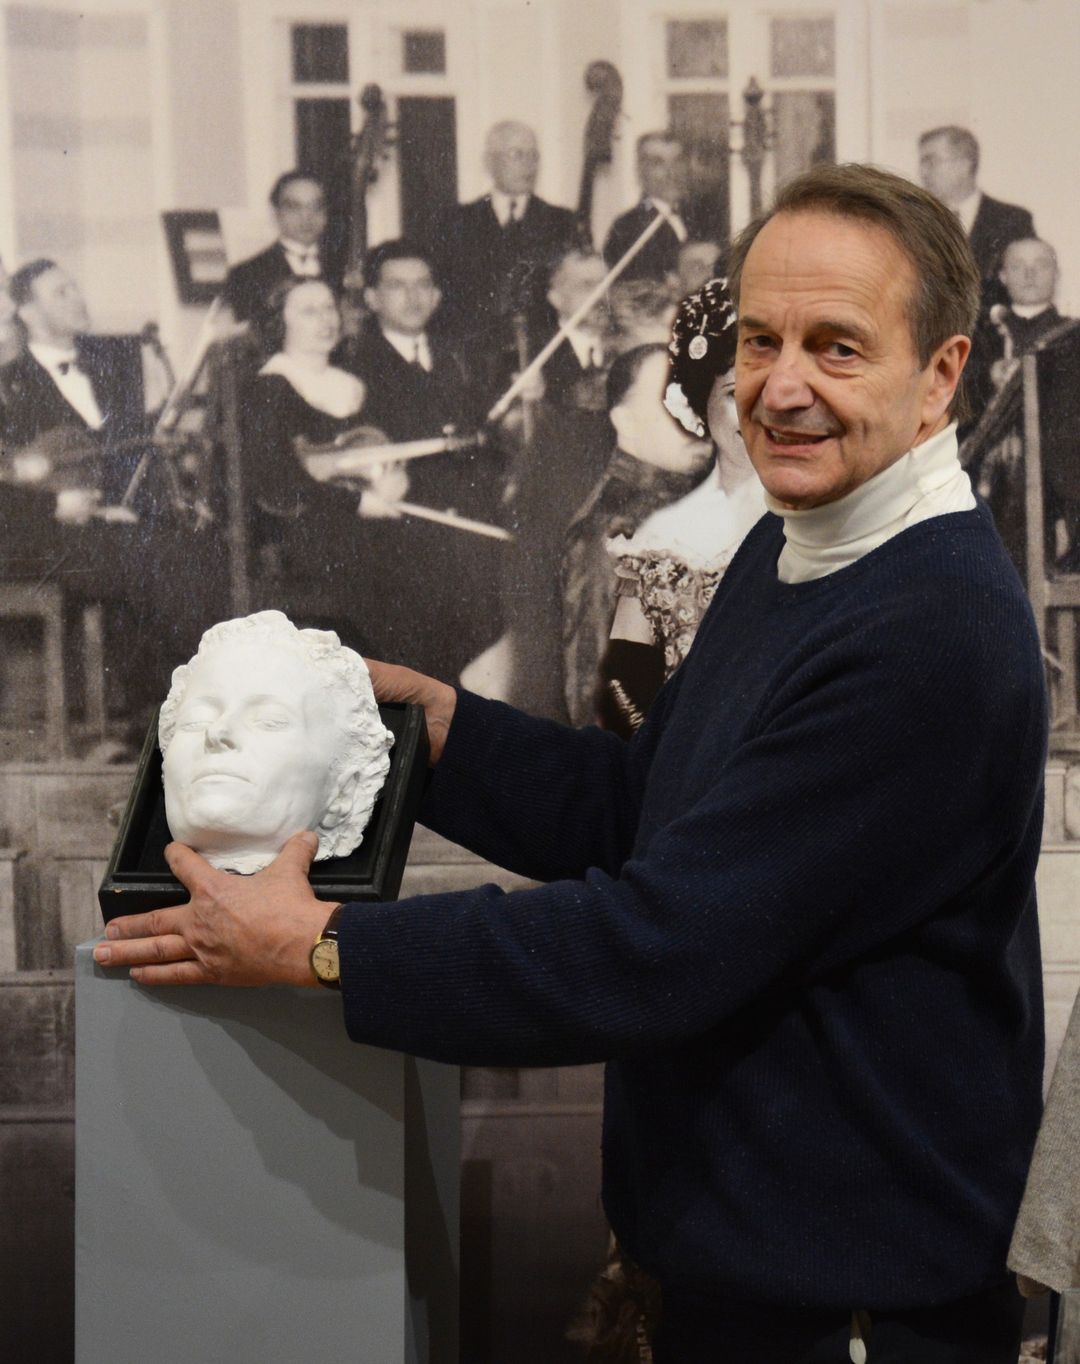 The handing over of Maria Cebotari's death mask by her son Fritz Curzon and its inauguration in the permanent exhibition of the National Museum of the History of Moldova